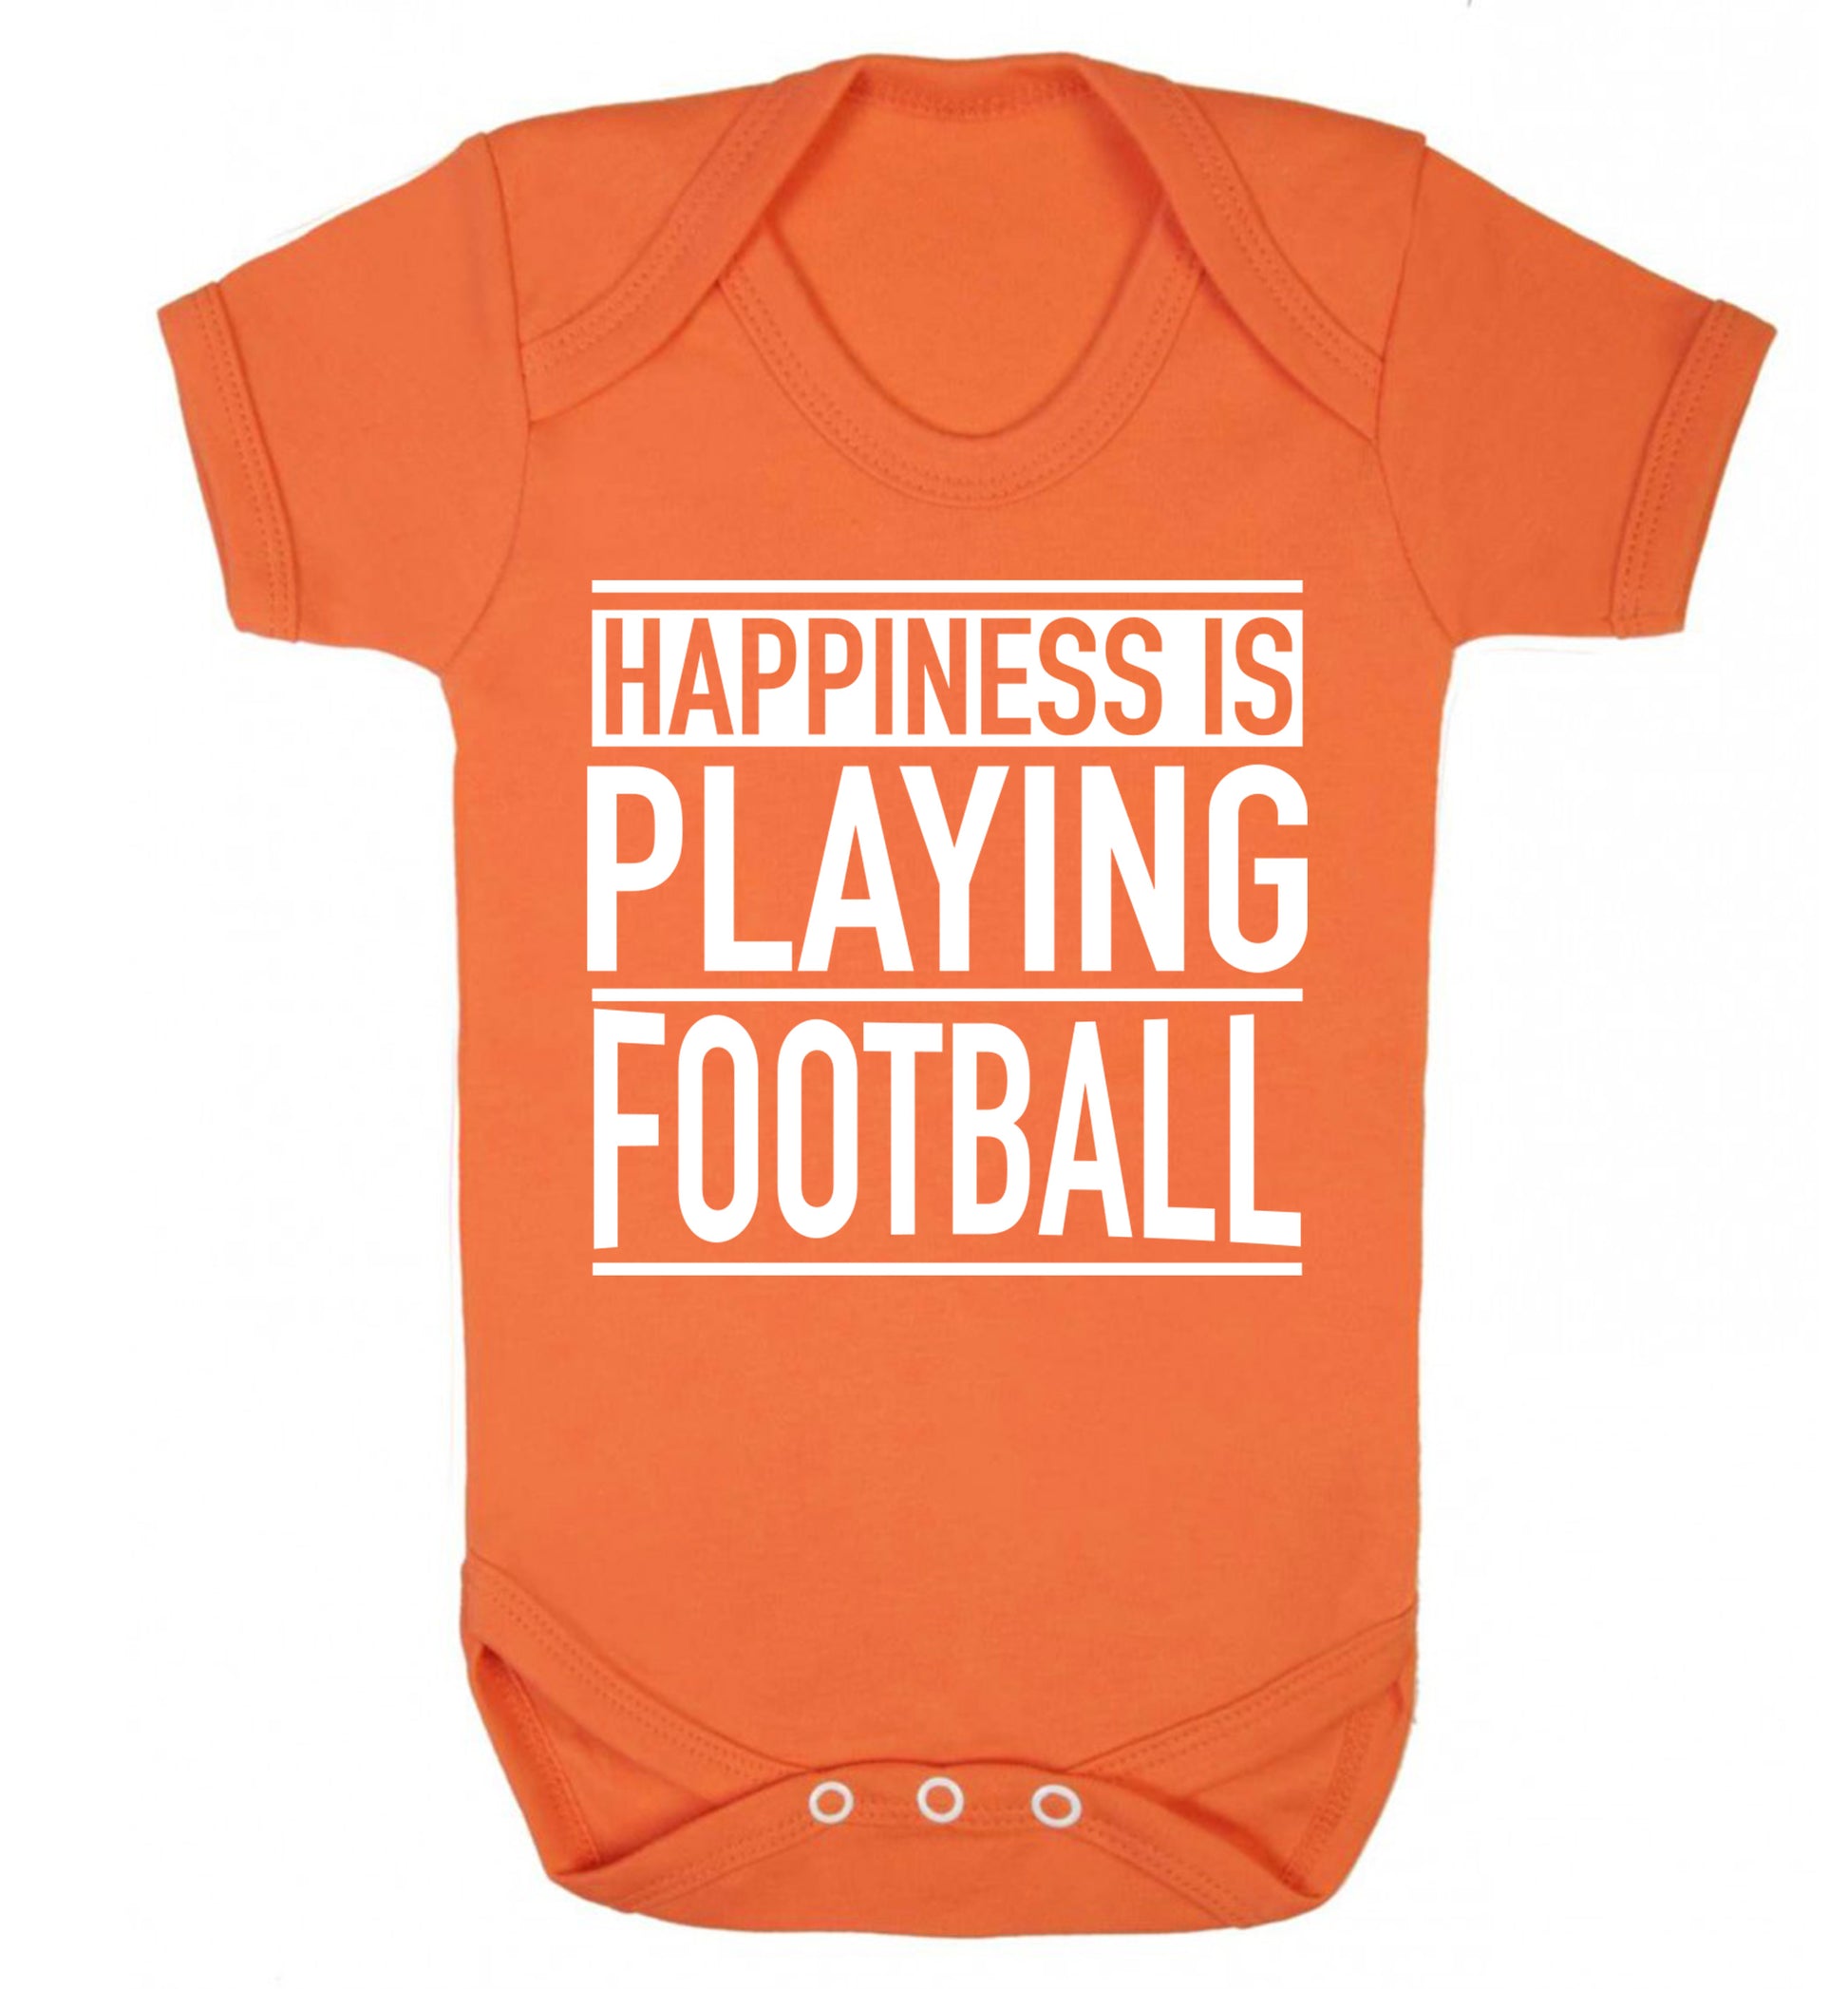 Happiness is playing football Baby Vest orange 18-24 months